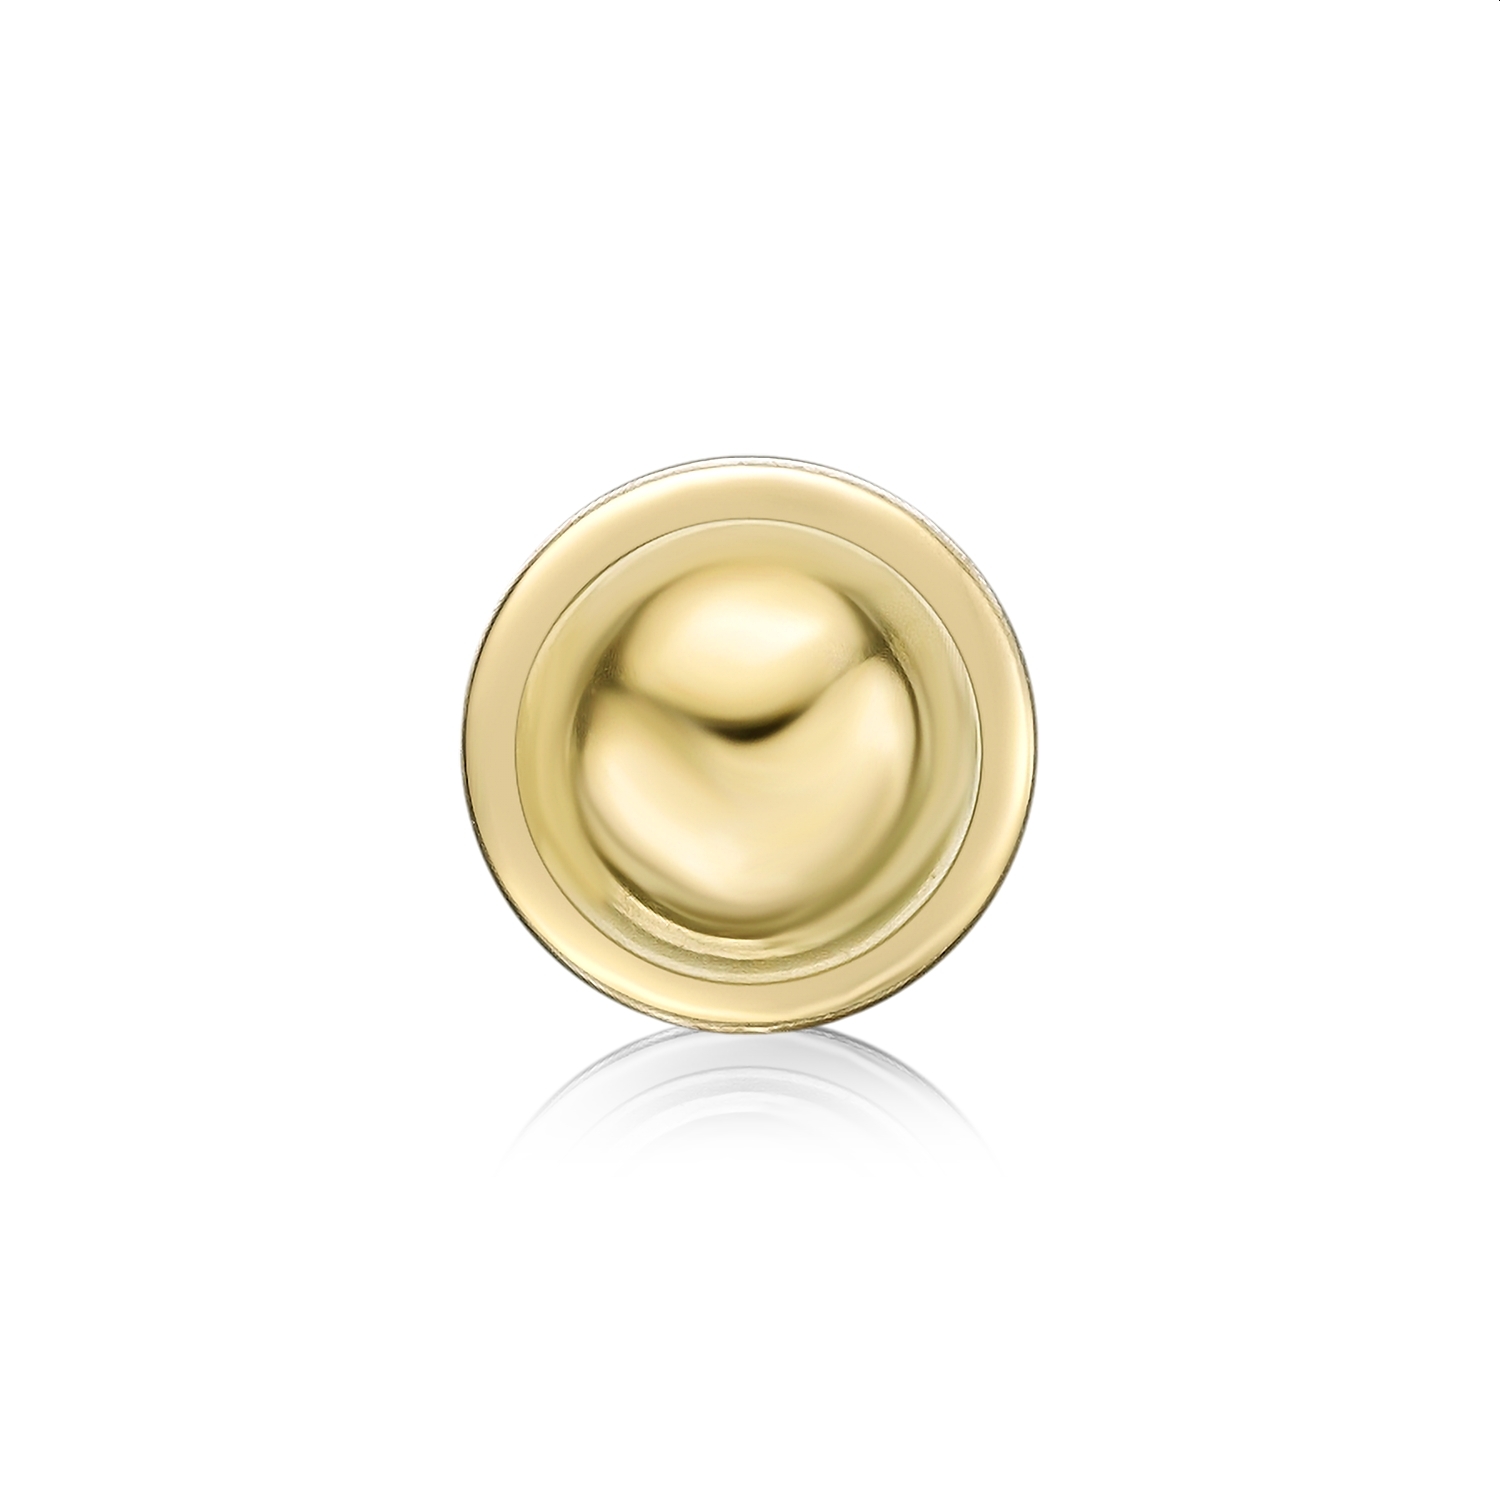 Women's Labret Stud with Hollow Ball, 14K Yellow Gold, 16 Gauge, 3 MM | Lavari Jewelers